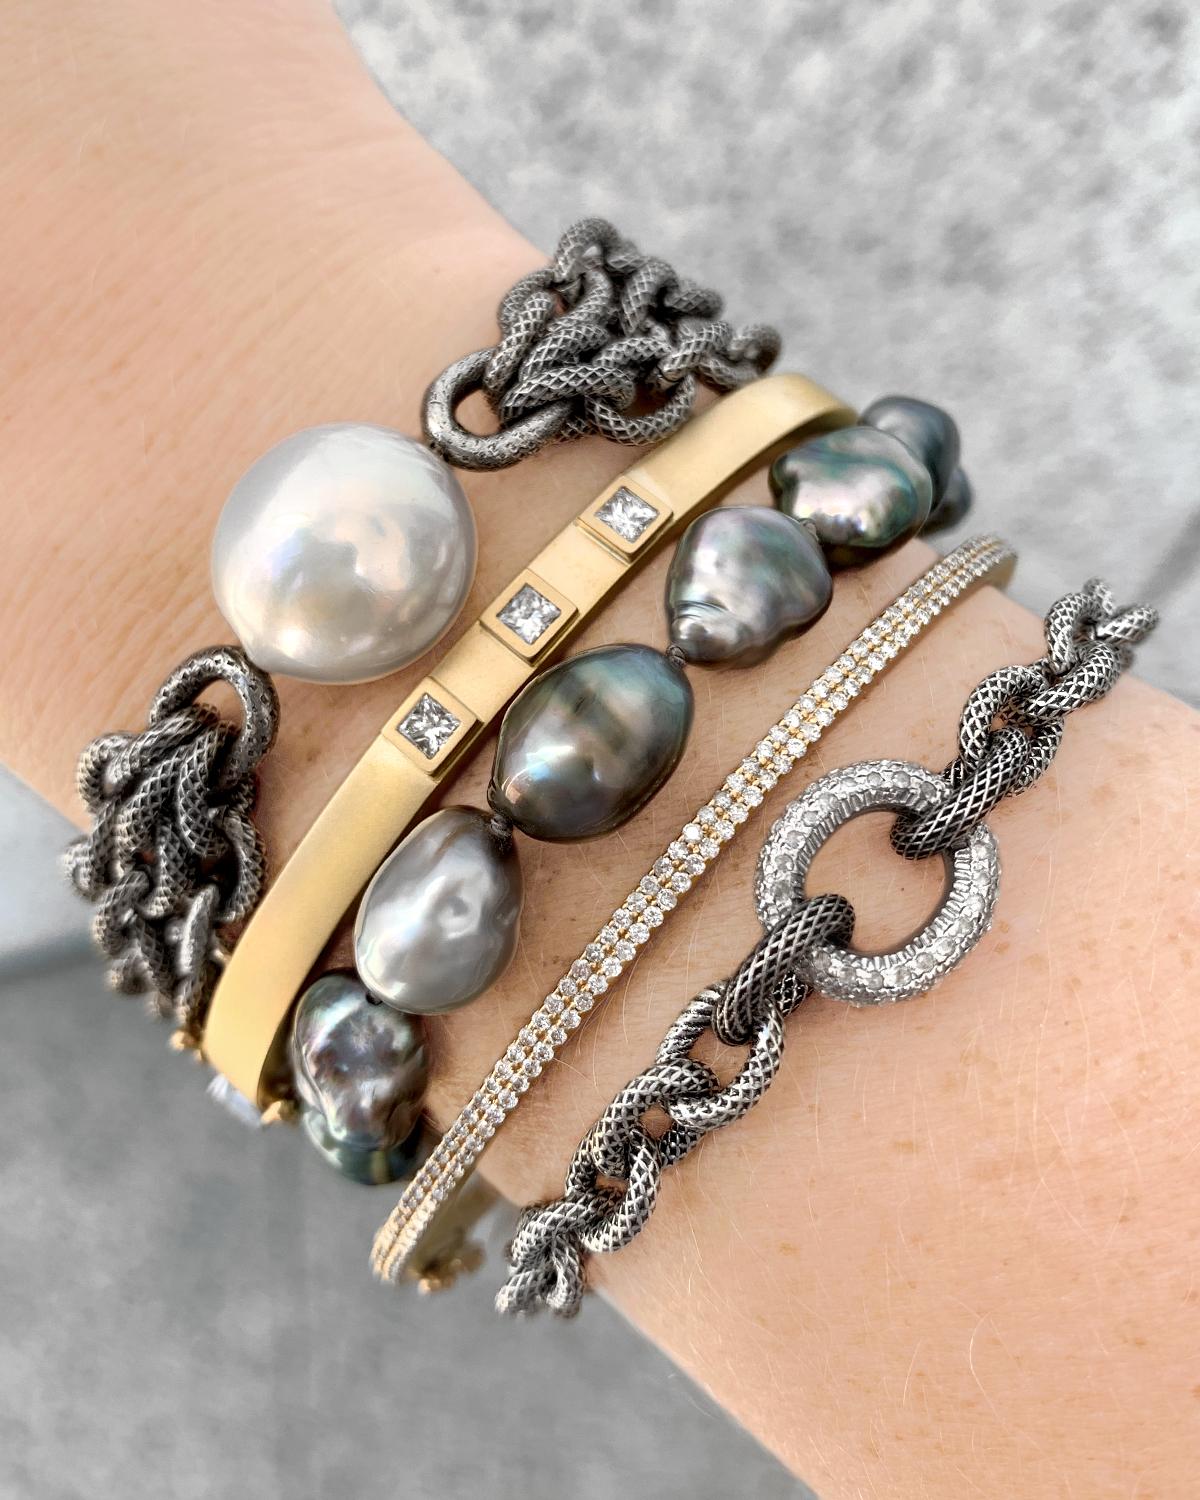 One of a Kind Tahitian Keshi Pearl Links Bracelet featuring fourteen lustrous, iridescent Tahitian keshi pearls and finished with a 14k yellow gold lobster clasp embedded with one round brilliant-cut white diamond. Hallmarked.

About the Designer -